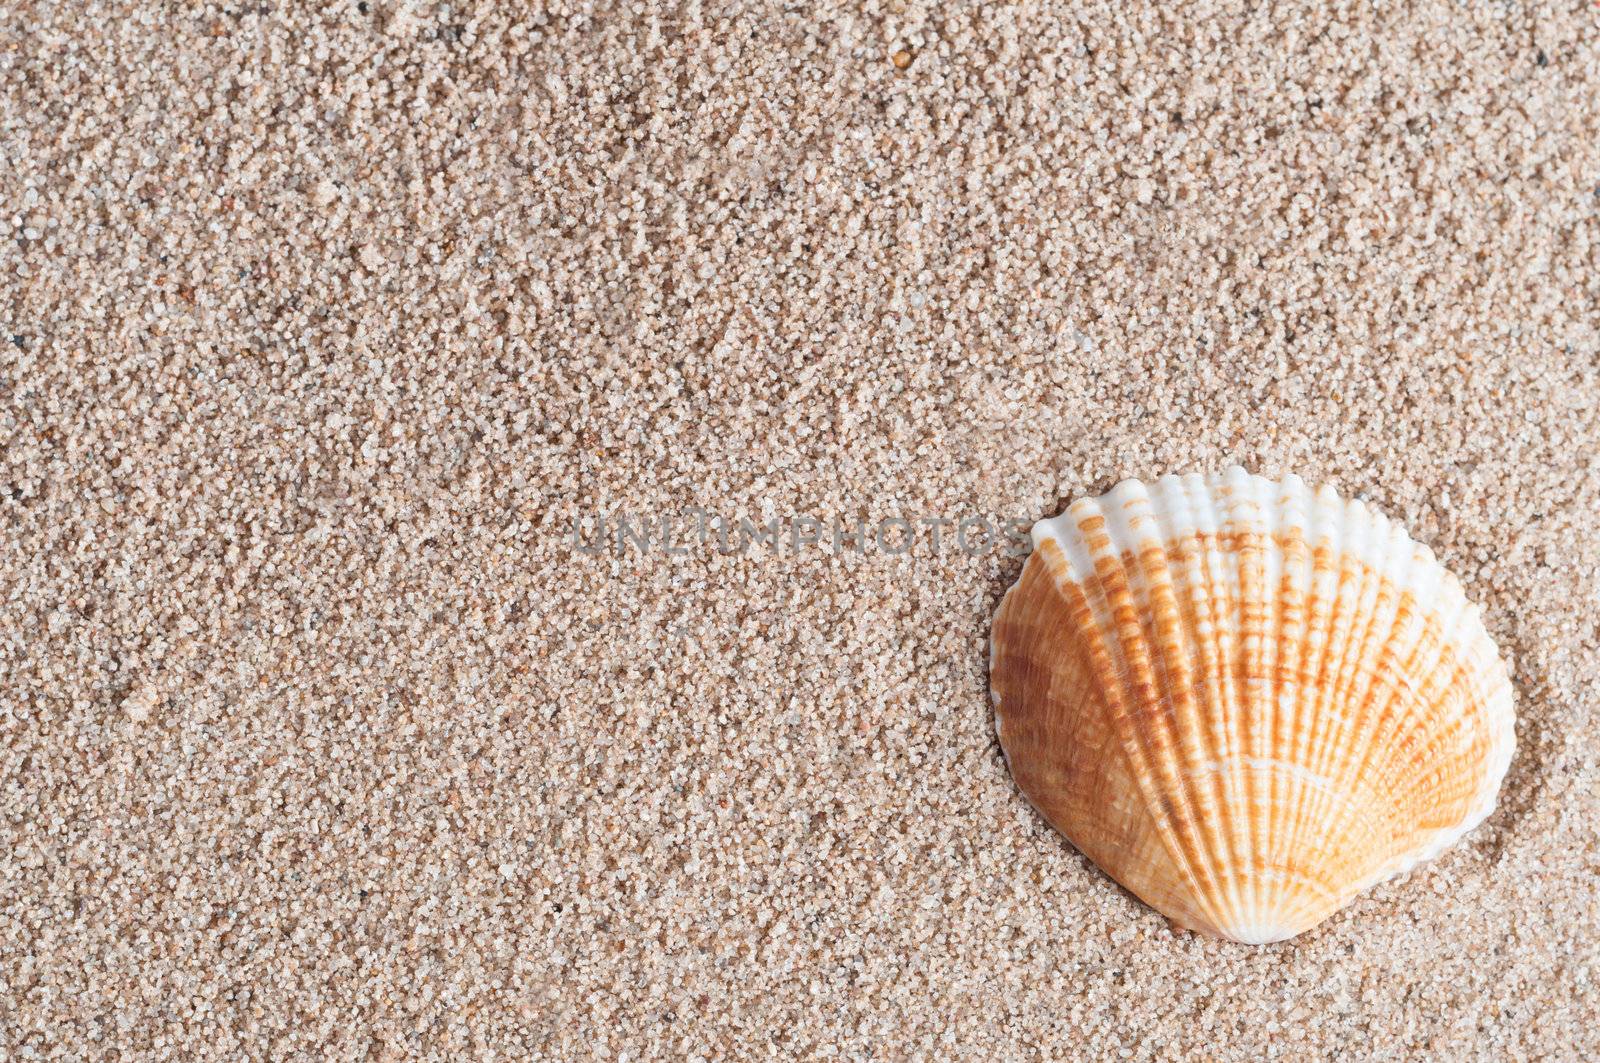 An orange and white fan shaped seashell, nestled into the lower right corner of grainy damp sand - which provides texture and copy space.